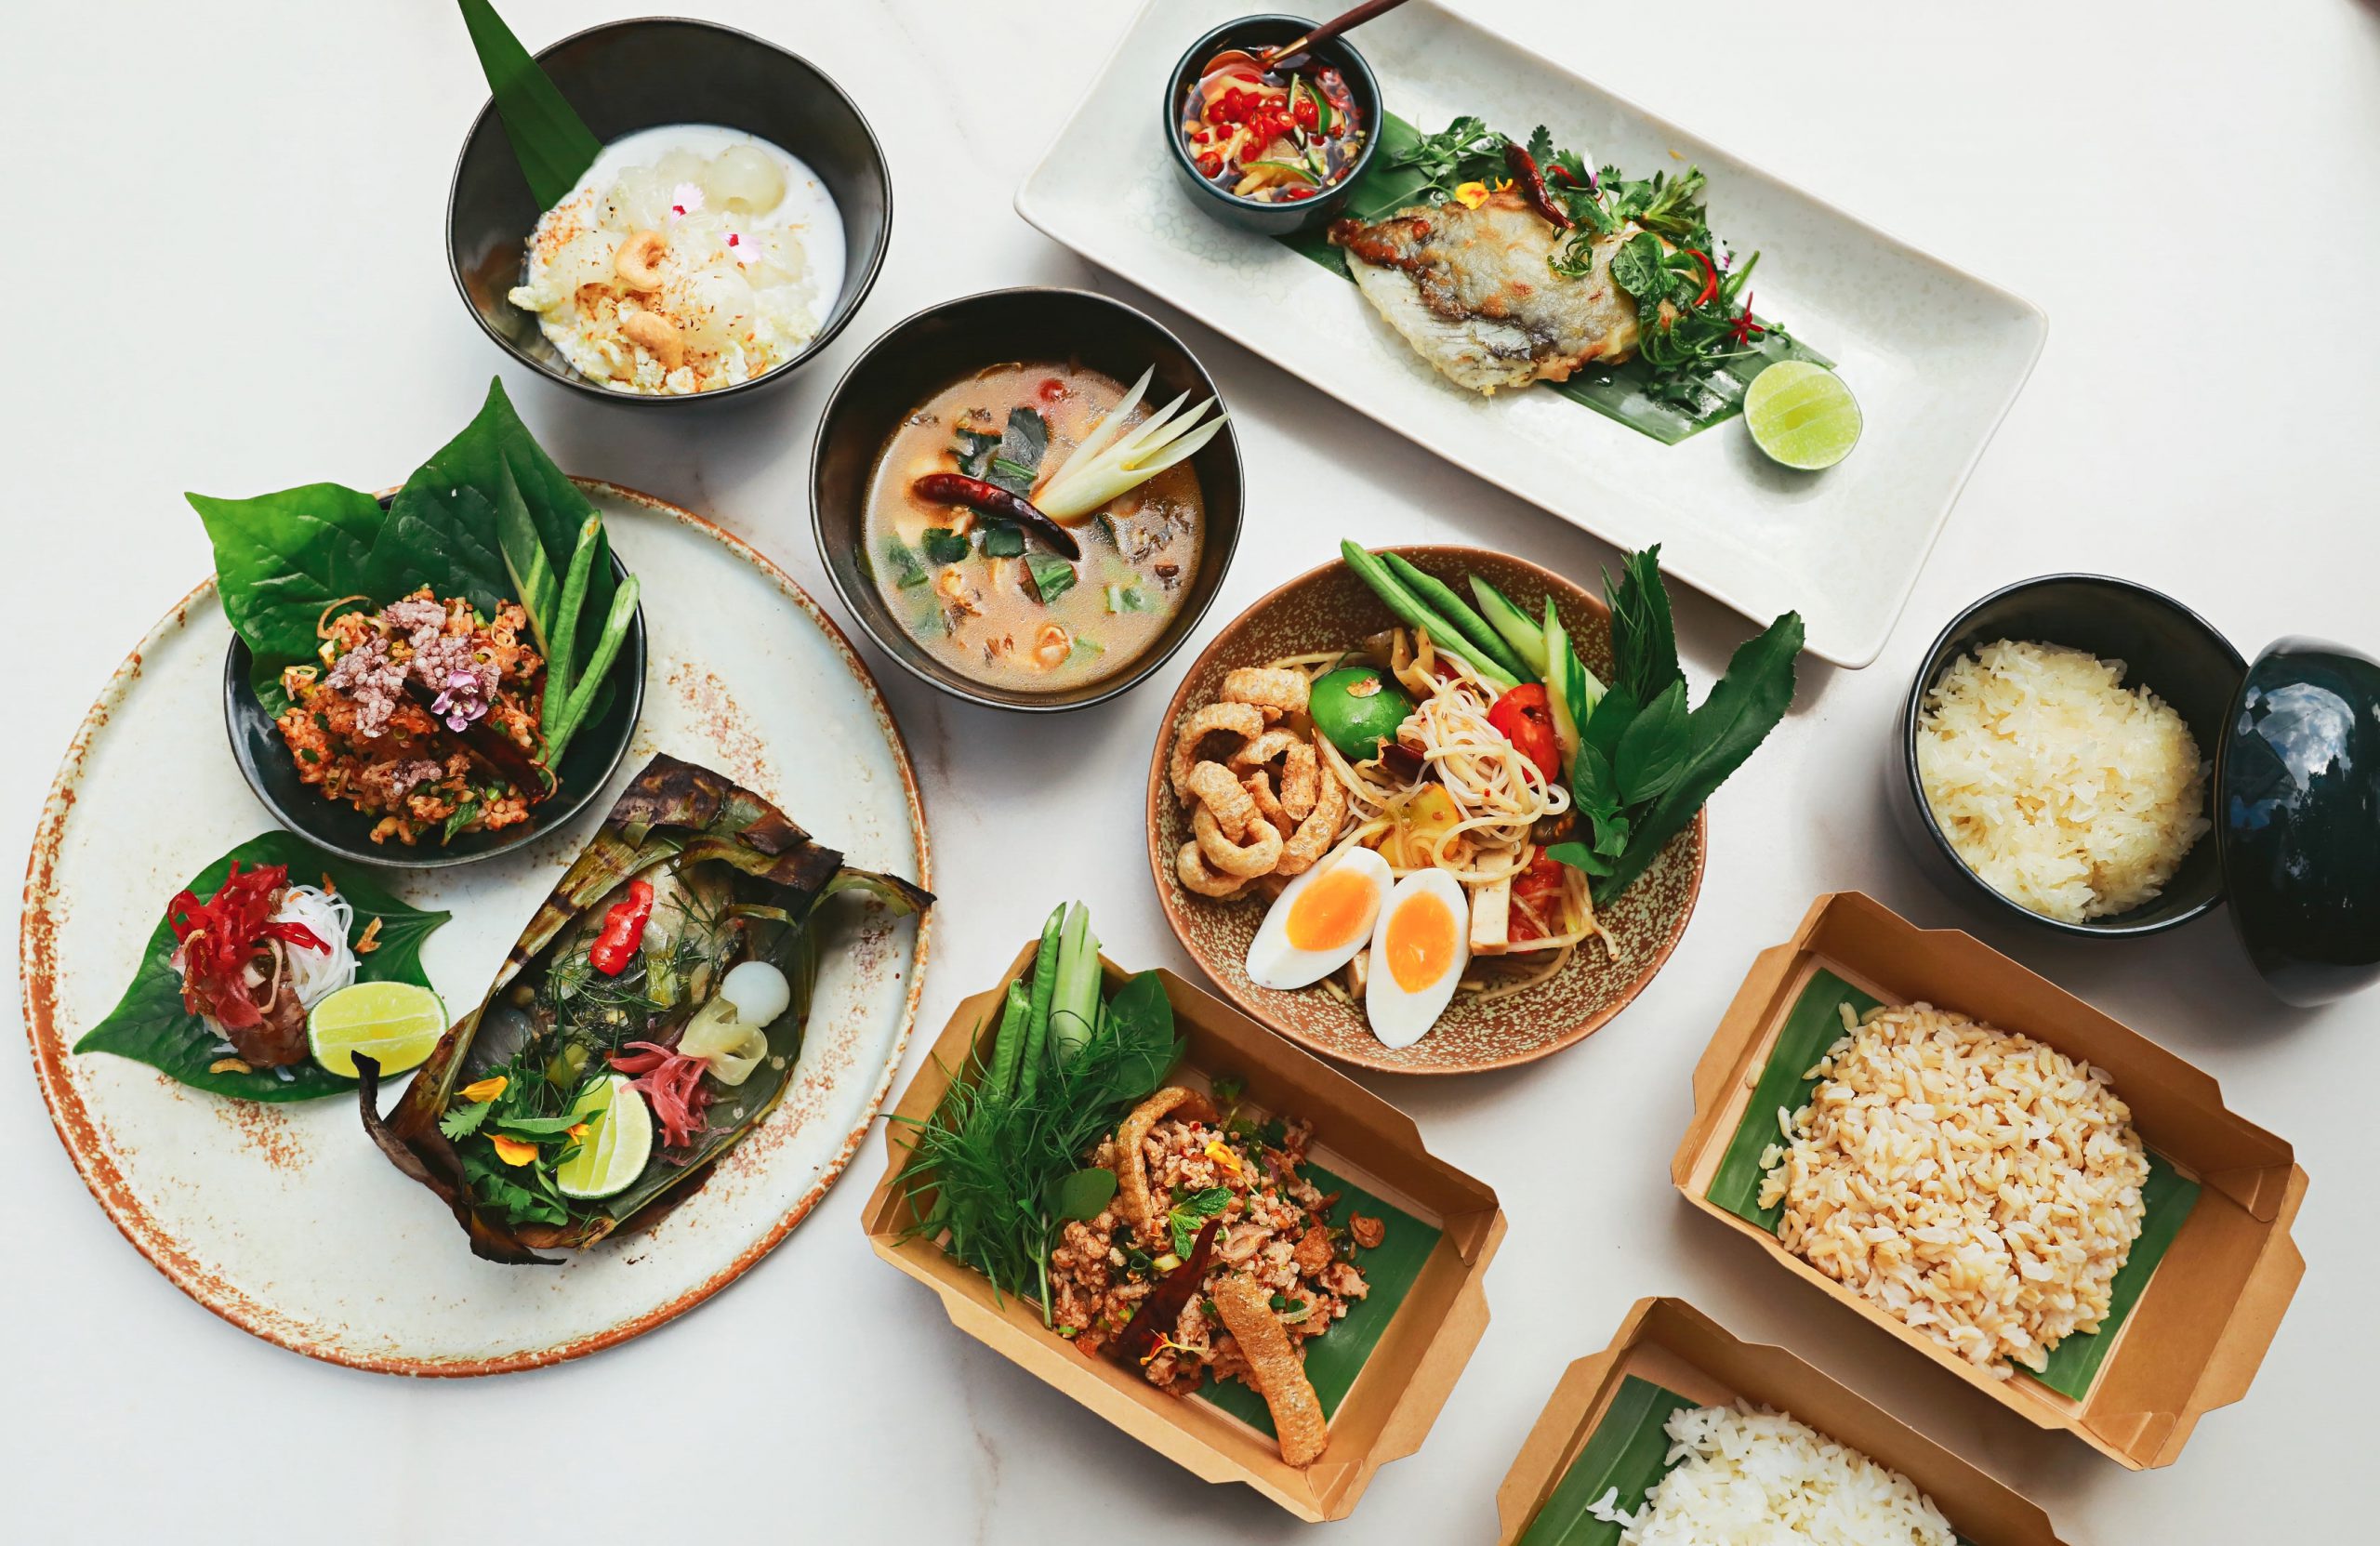 ‘CAPELLA AT HOME’ FOOD DELIVERY BY PHRA NAKHON INTRODUCES THE ‘LONG CHIM’ SIGNATURE THAI SET MENU